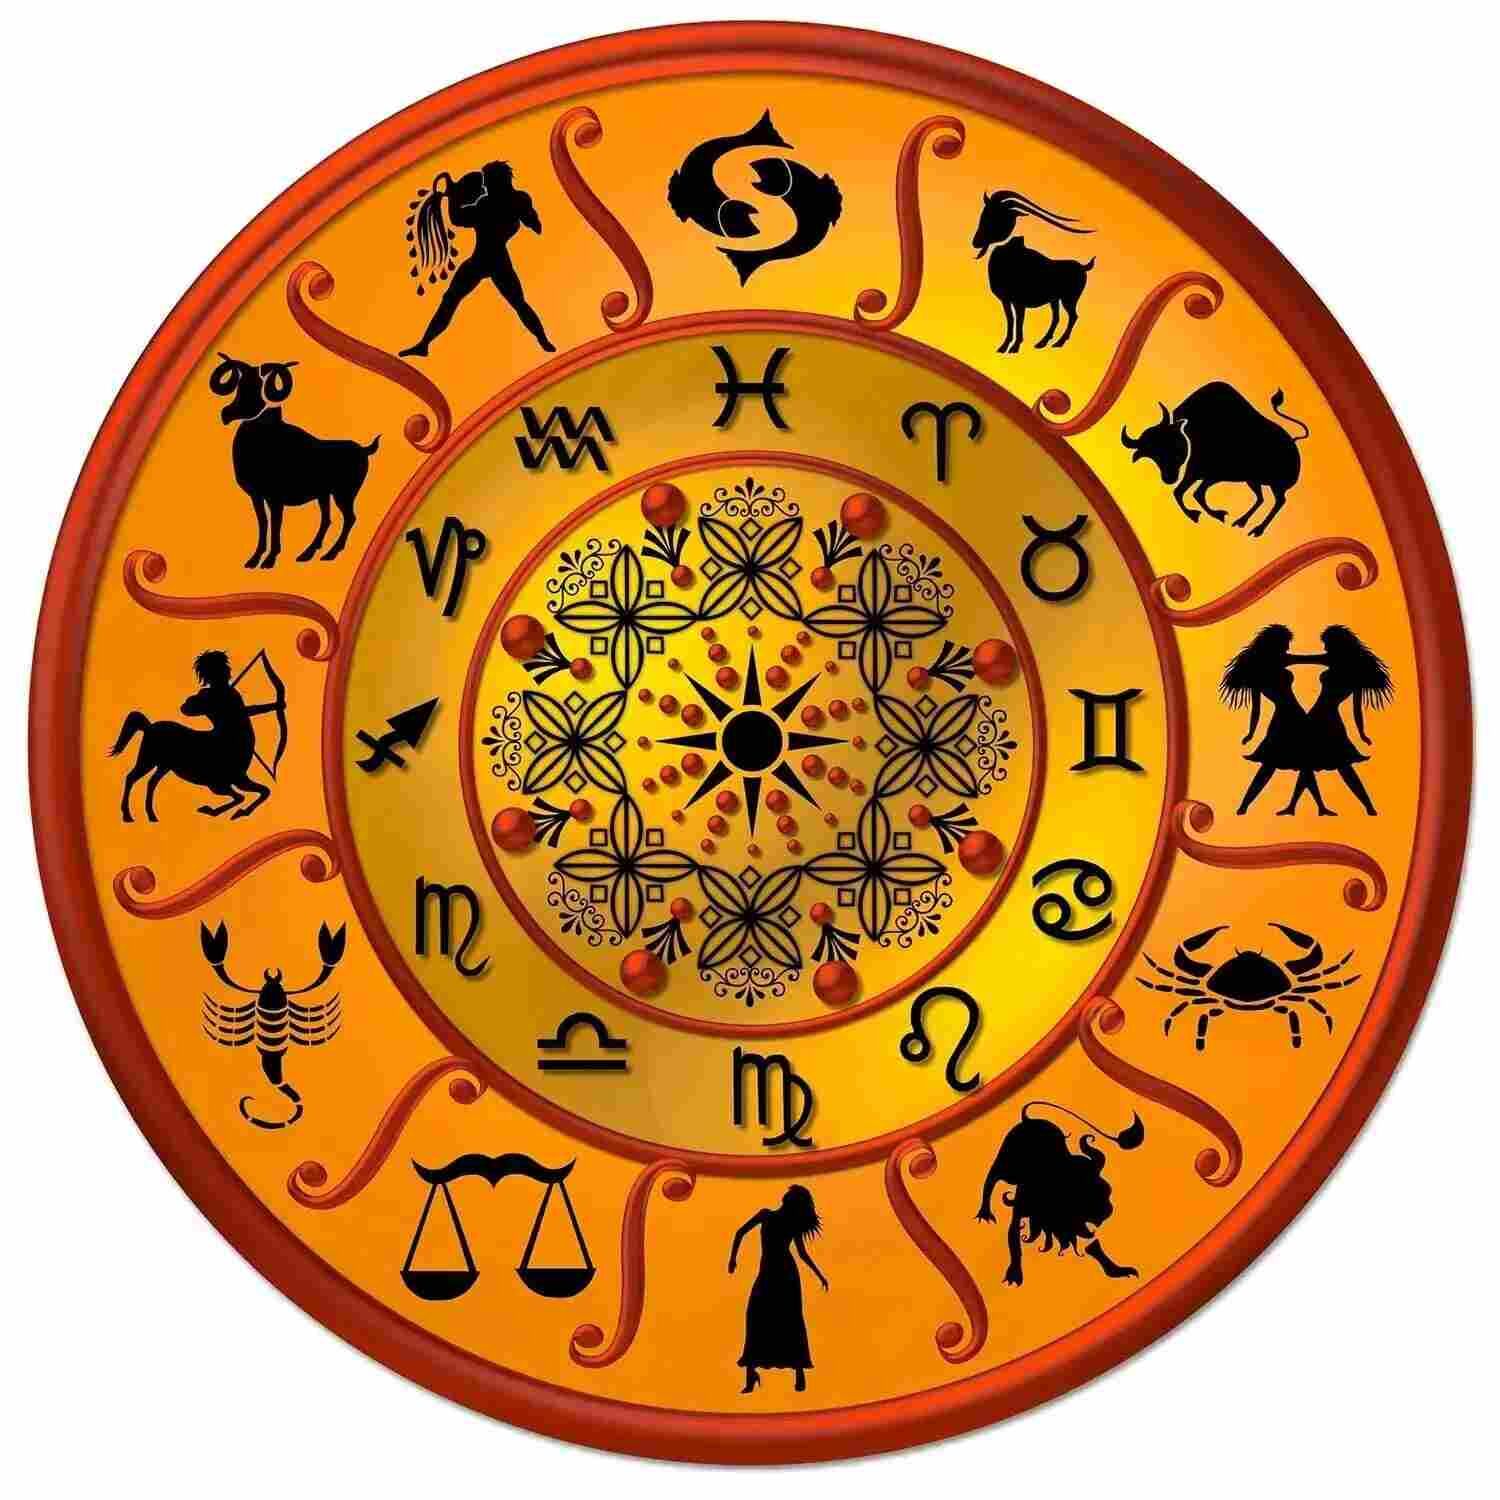 08 February – Know Your Todays Horoscope